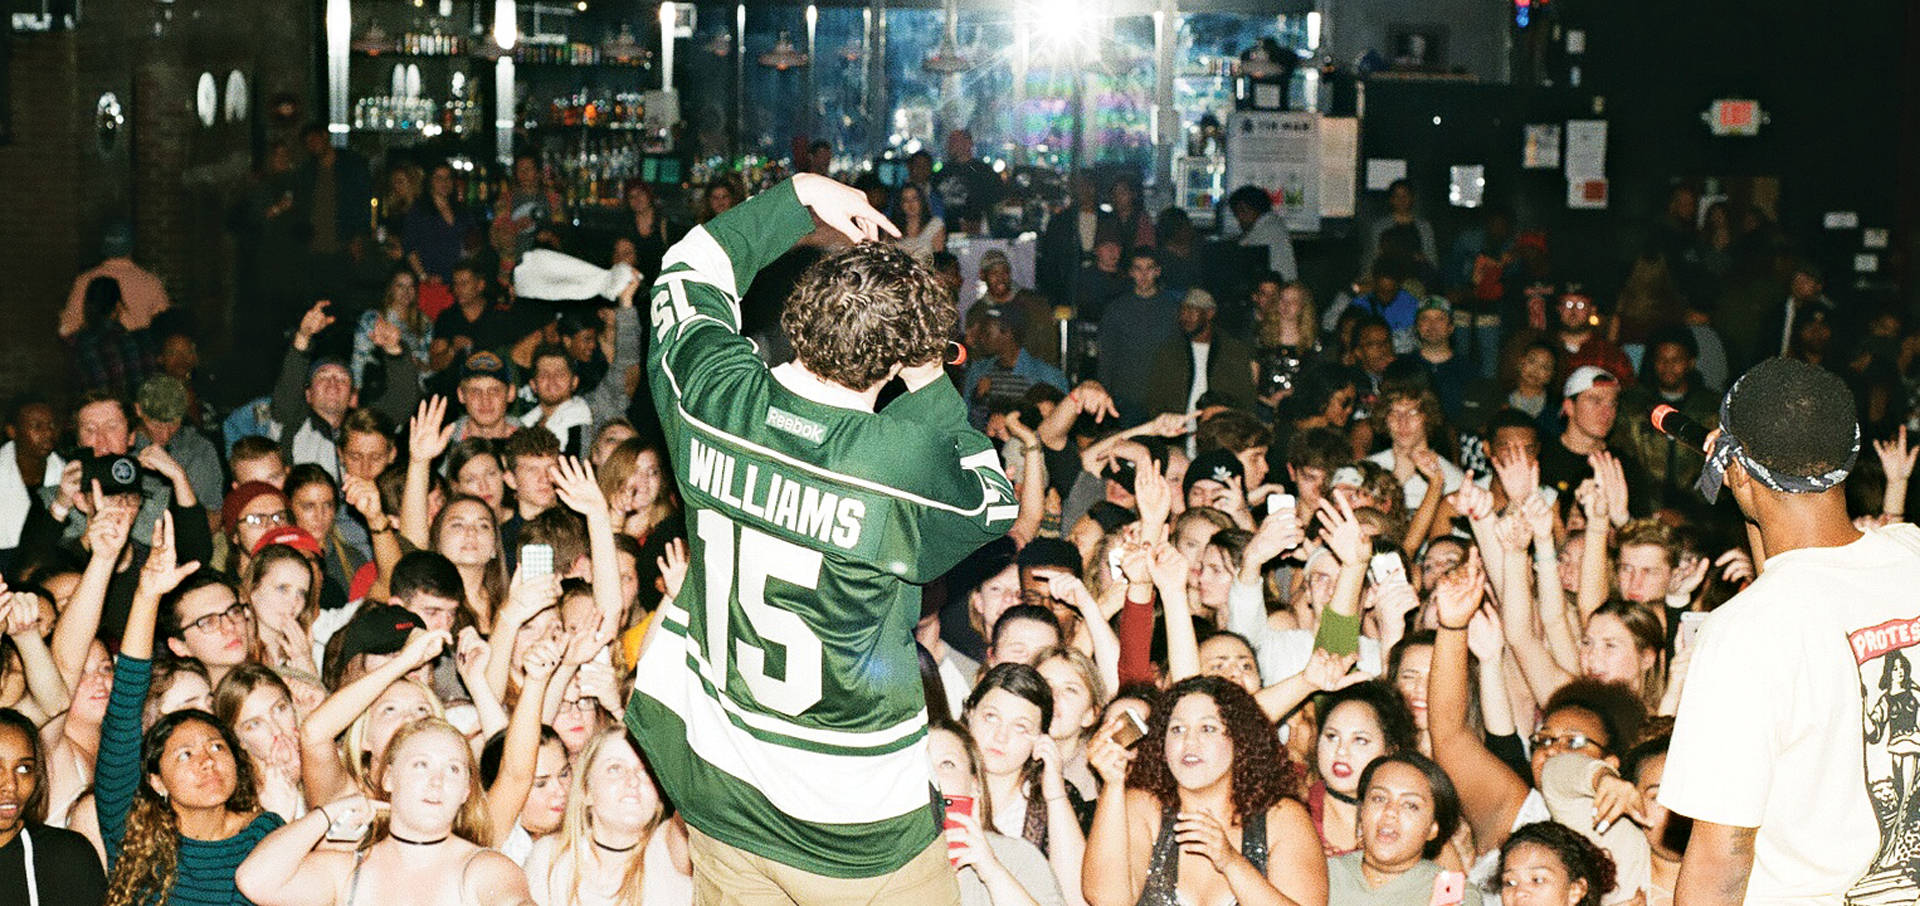 Jack Harlow With Crowd Wallpaper